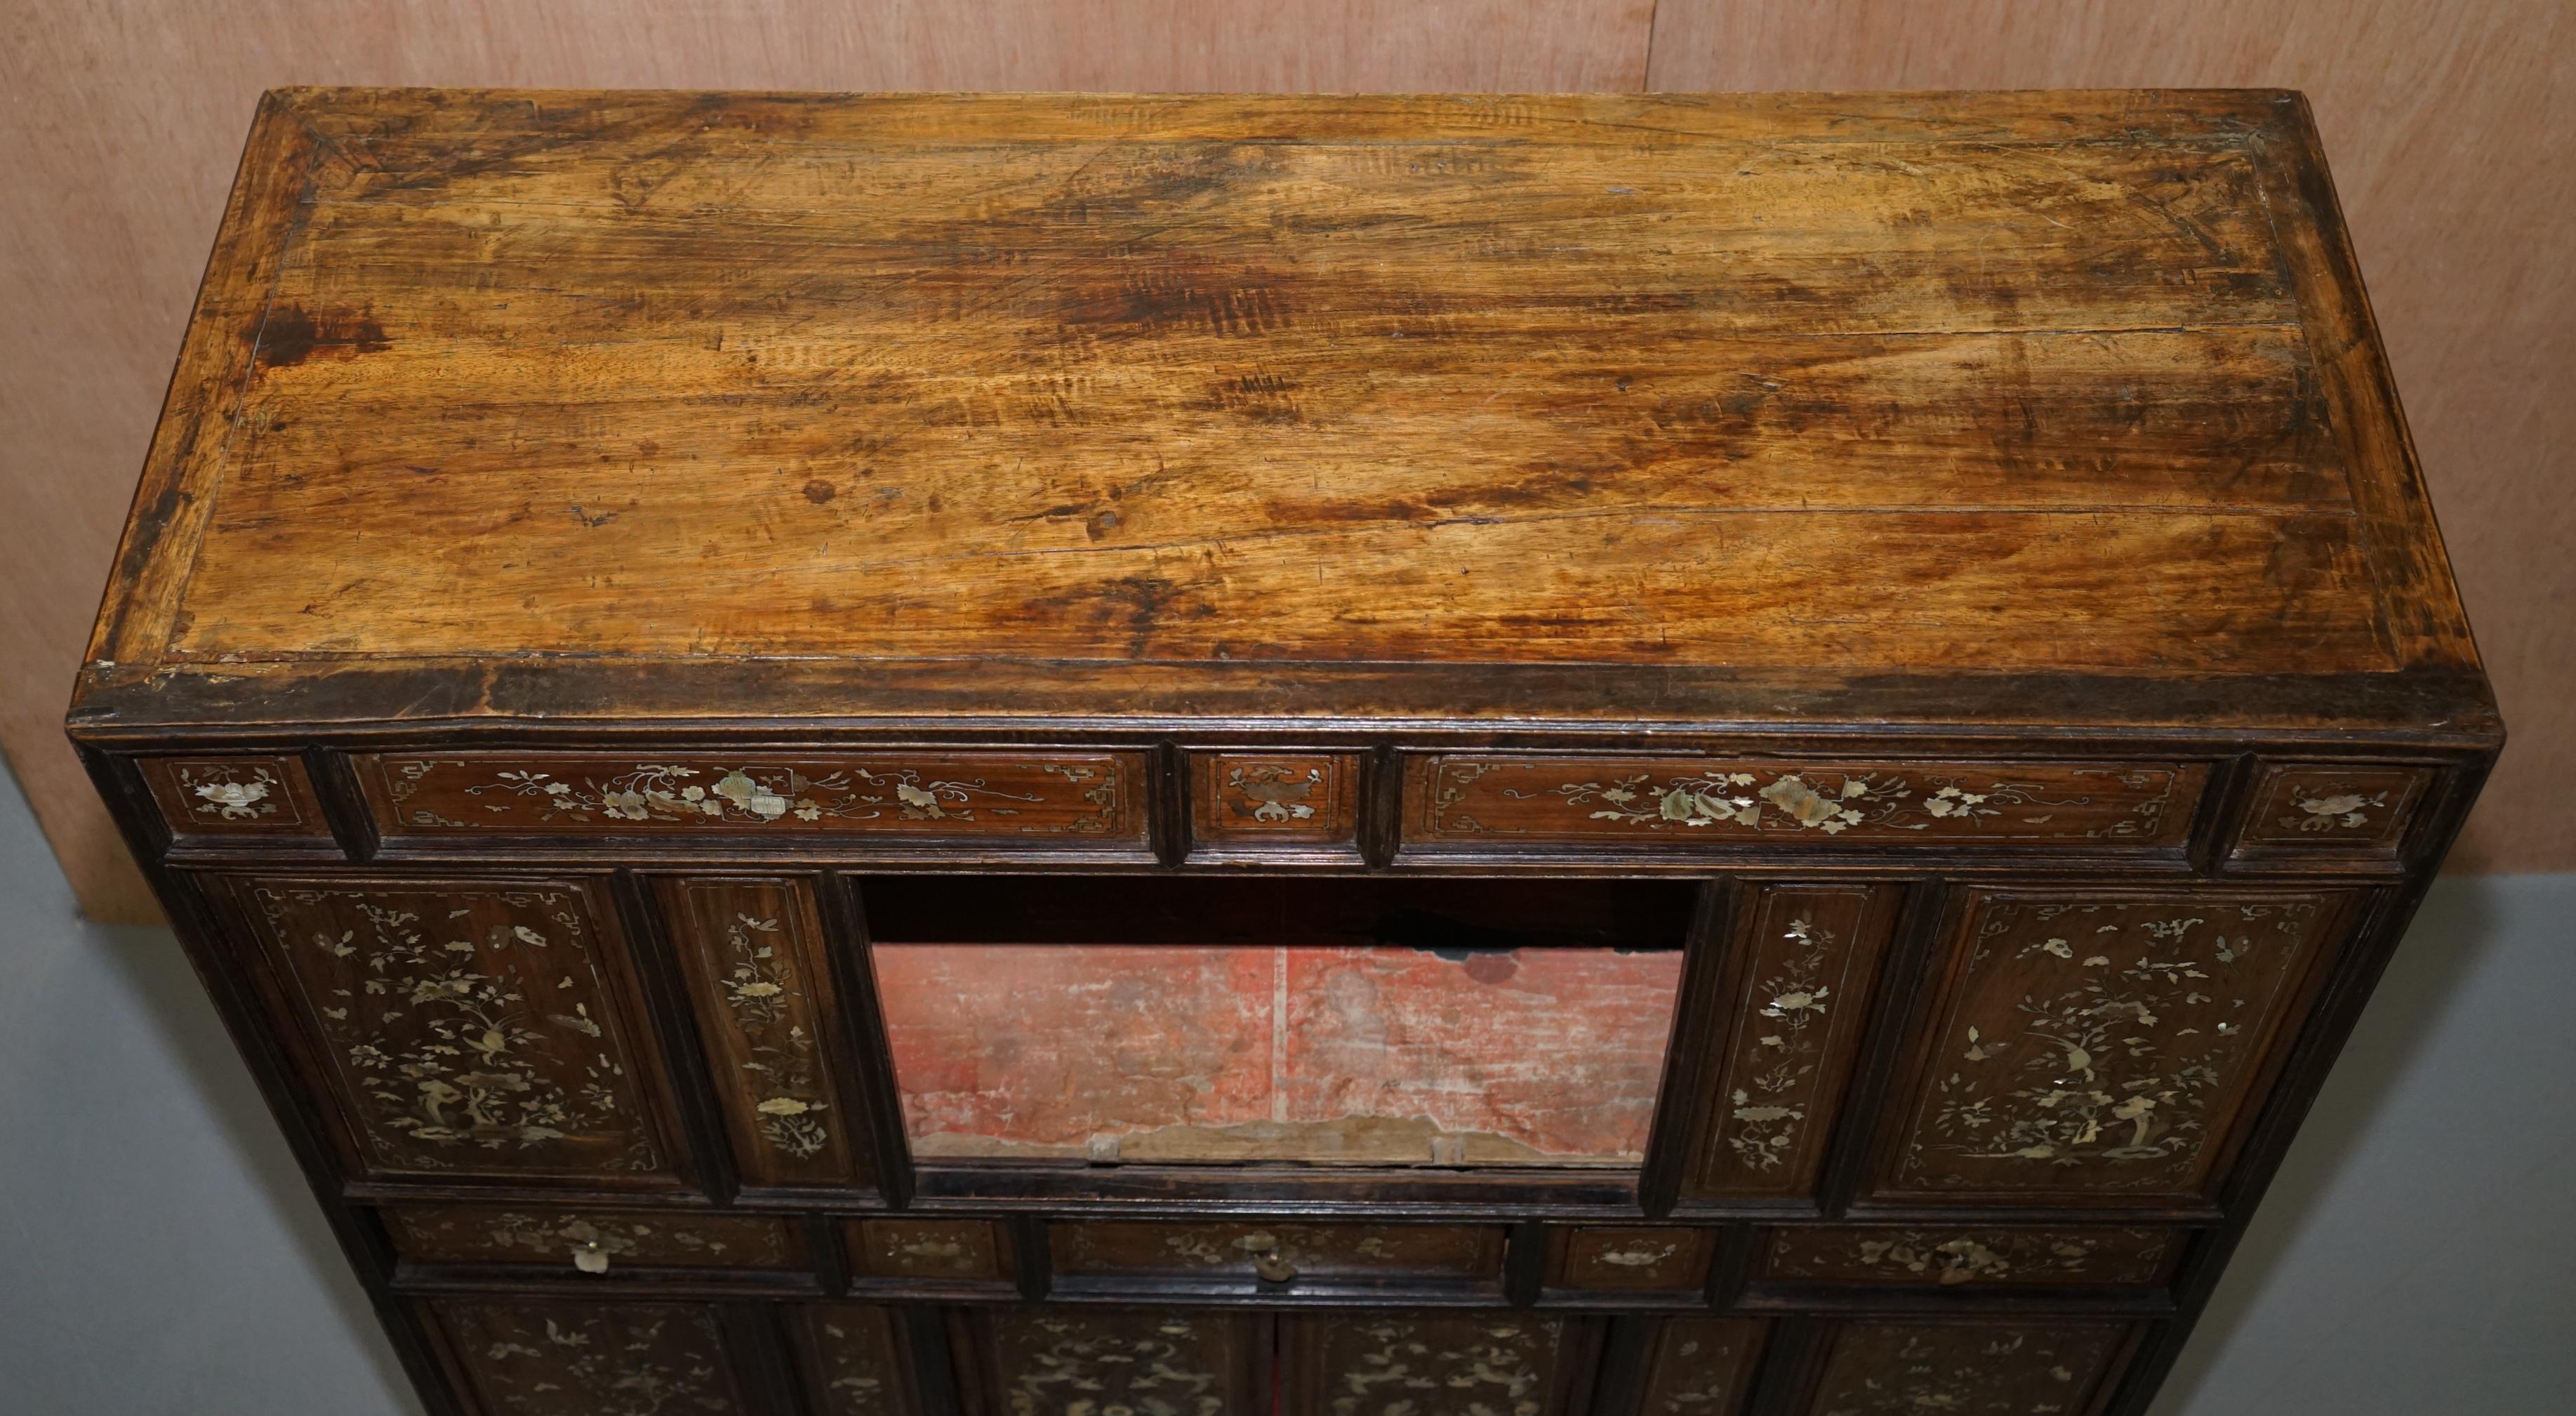 Inlay Very Rare 19th Century Chinese Mother of Pearl Inlaid Cabinet Cupboard Drawers For Sale